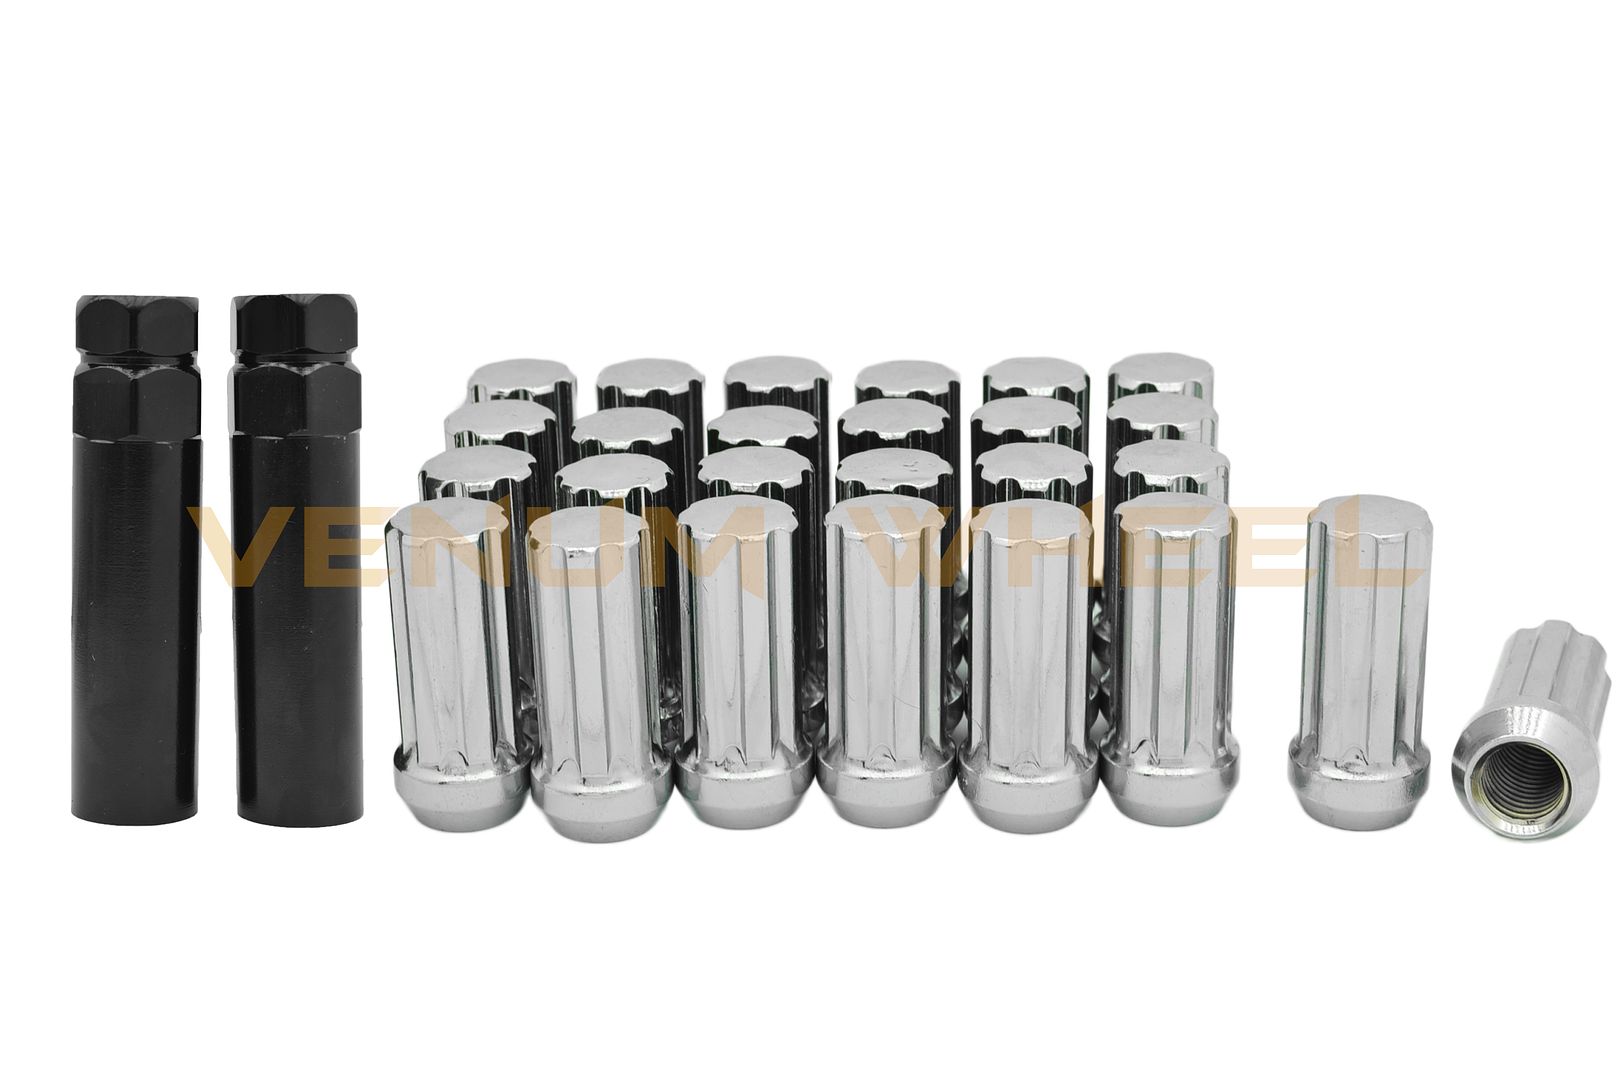 24pc 2004-2014 Ford F-150 Raptor Black M14x2.0 OEM//Factory Replacement Lug Nuts